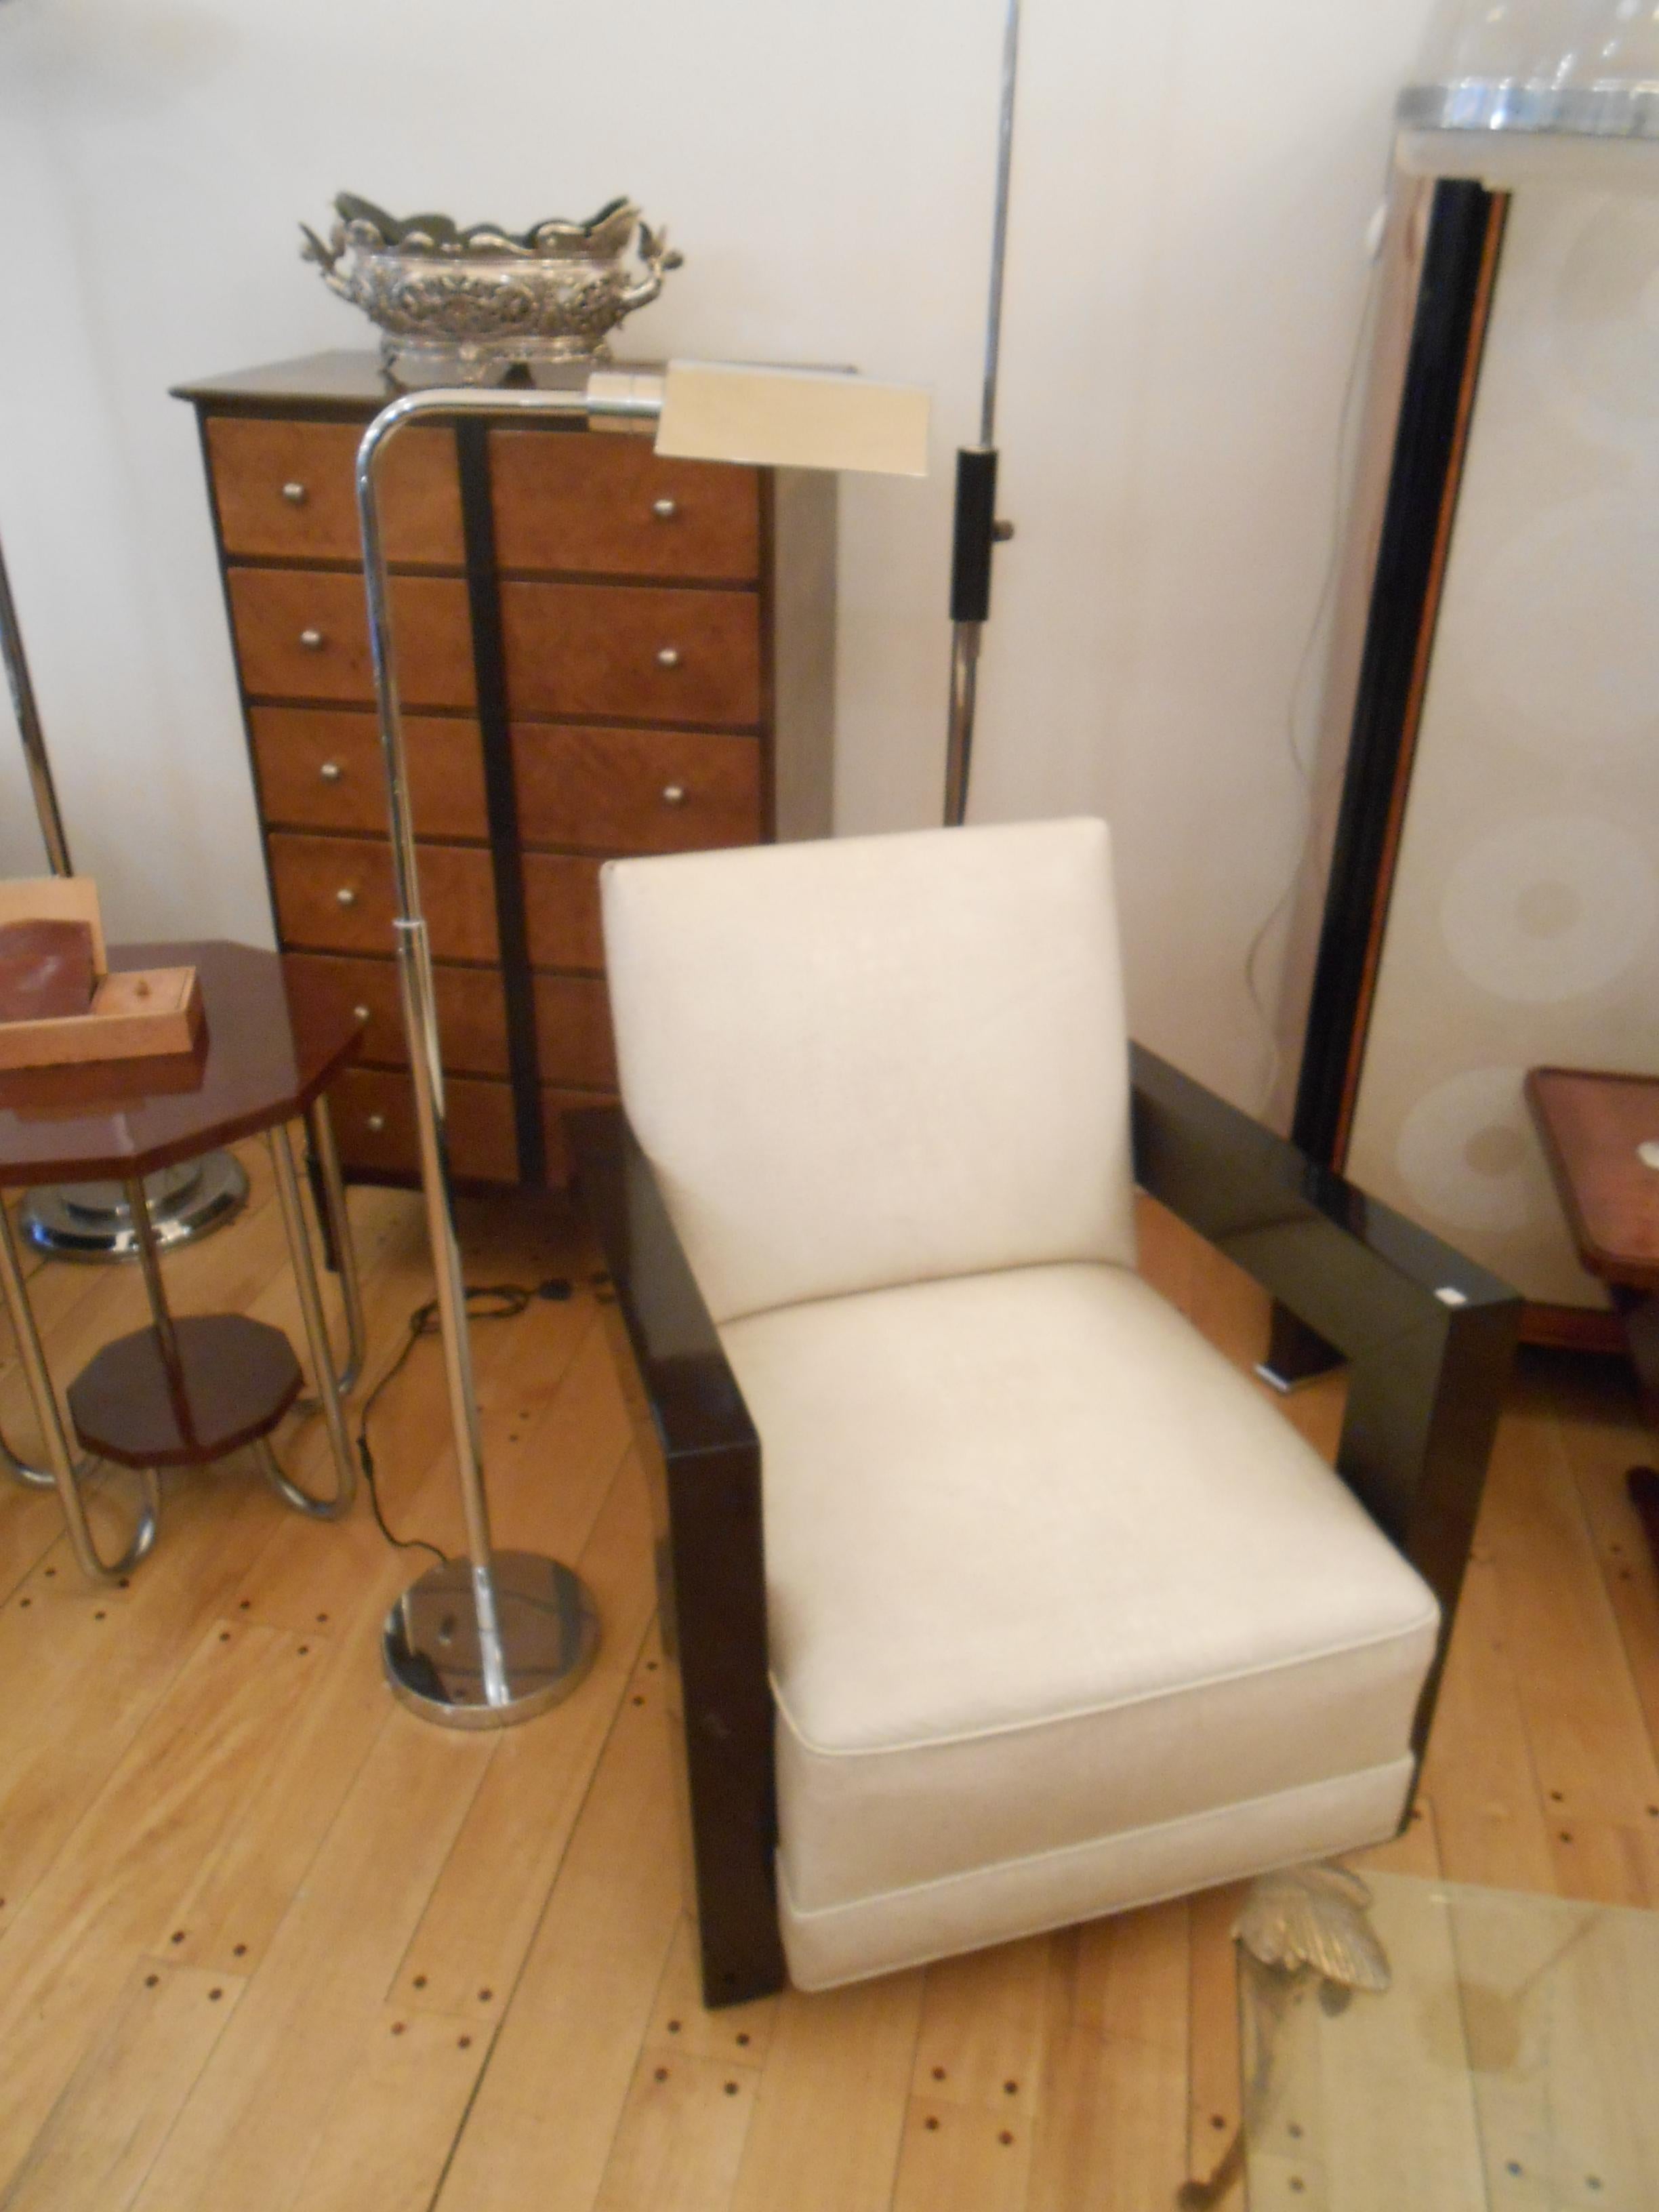 2 Art Deco armchairs in leather and wood

Year 1935
Materials : Wood and leather
They were reupholstered 10 years ago
Elegant and sophisticated armchairs.
You want to live in the golden years, these are the armchairs your project needs.
We have